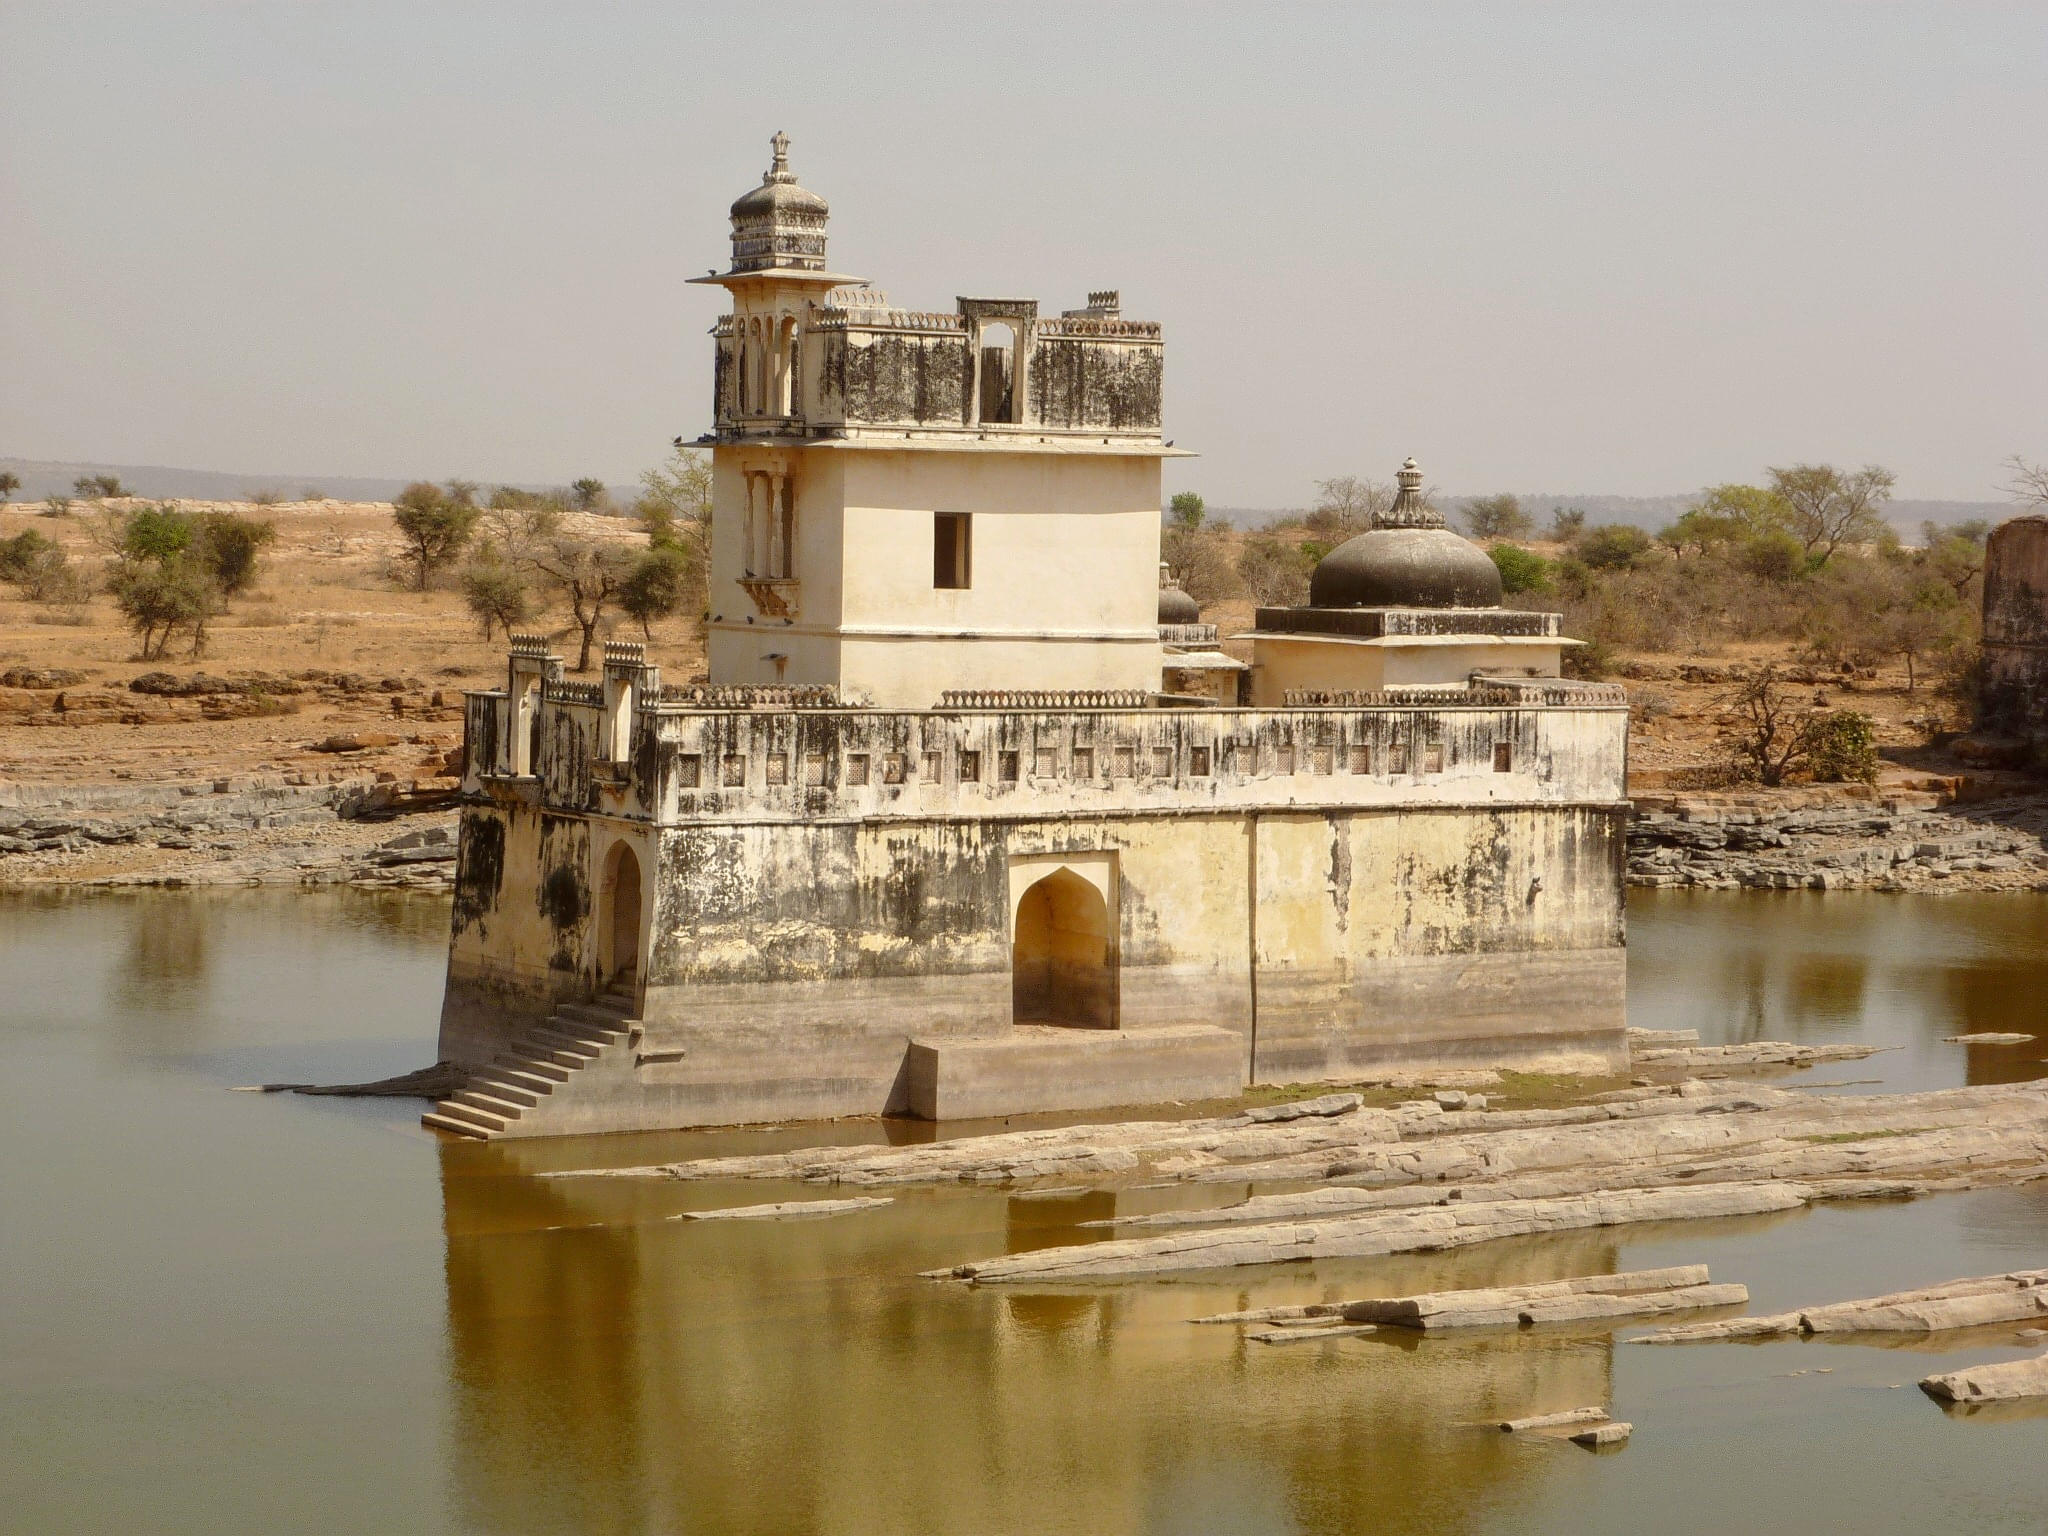 Padmini's Palace Overview